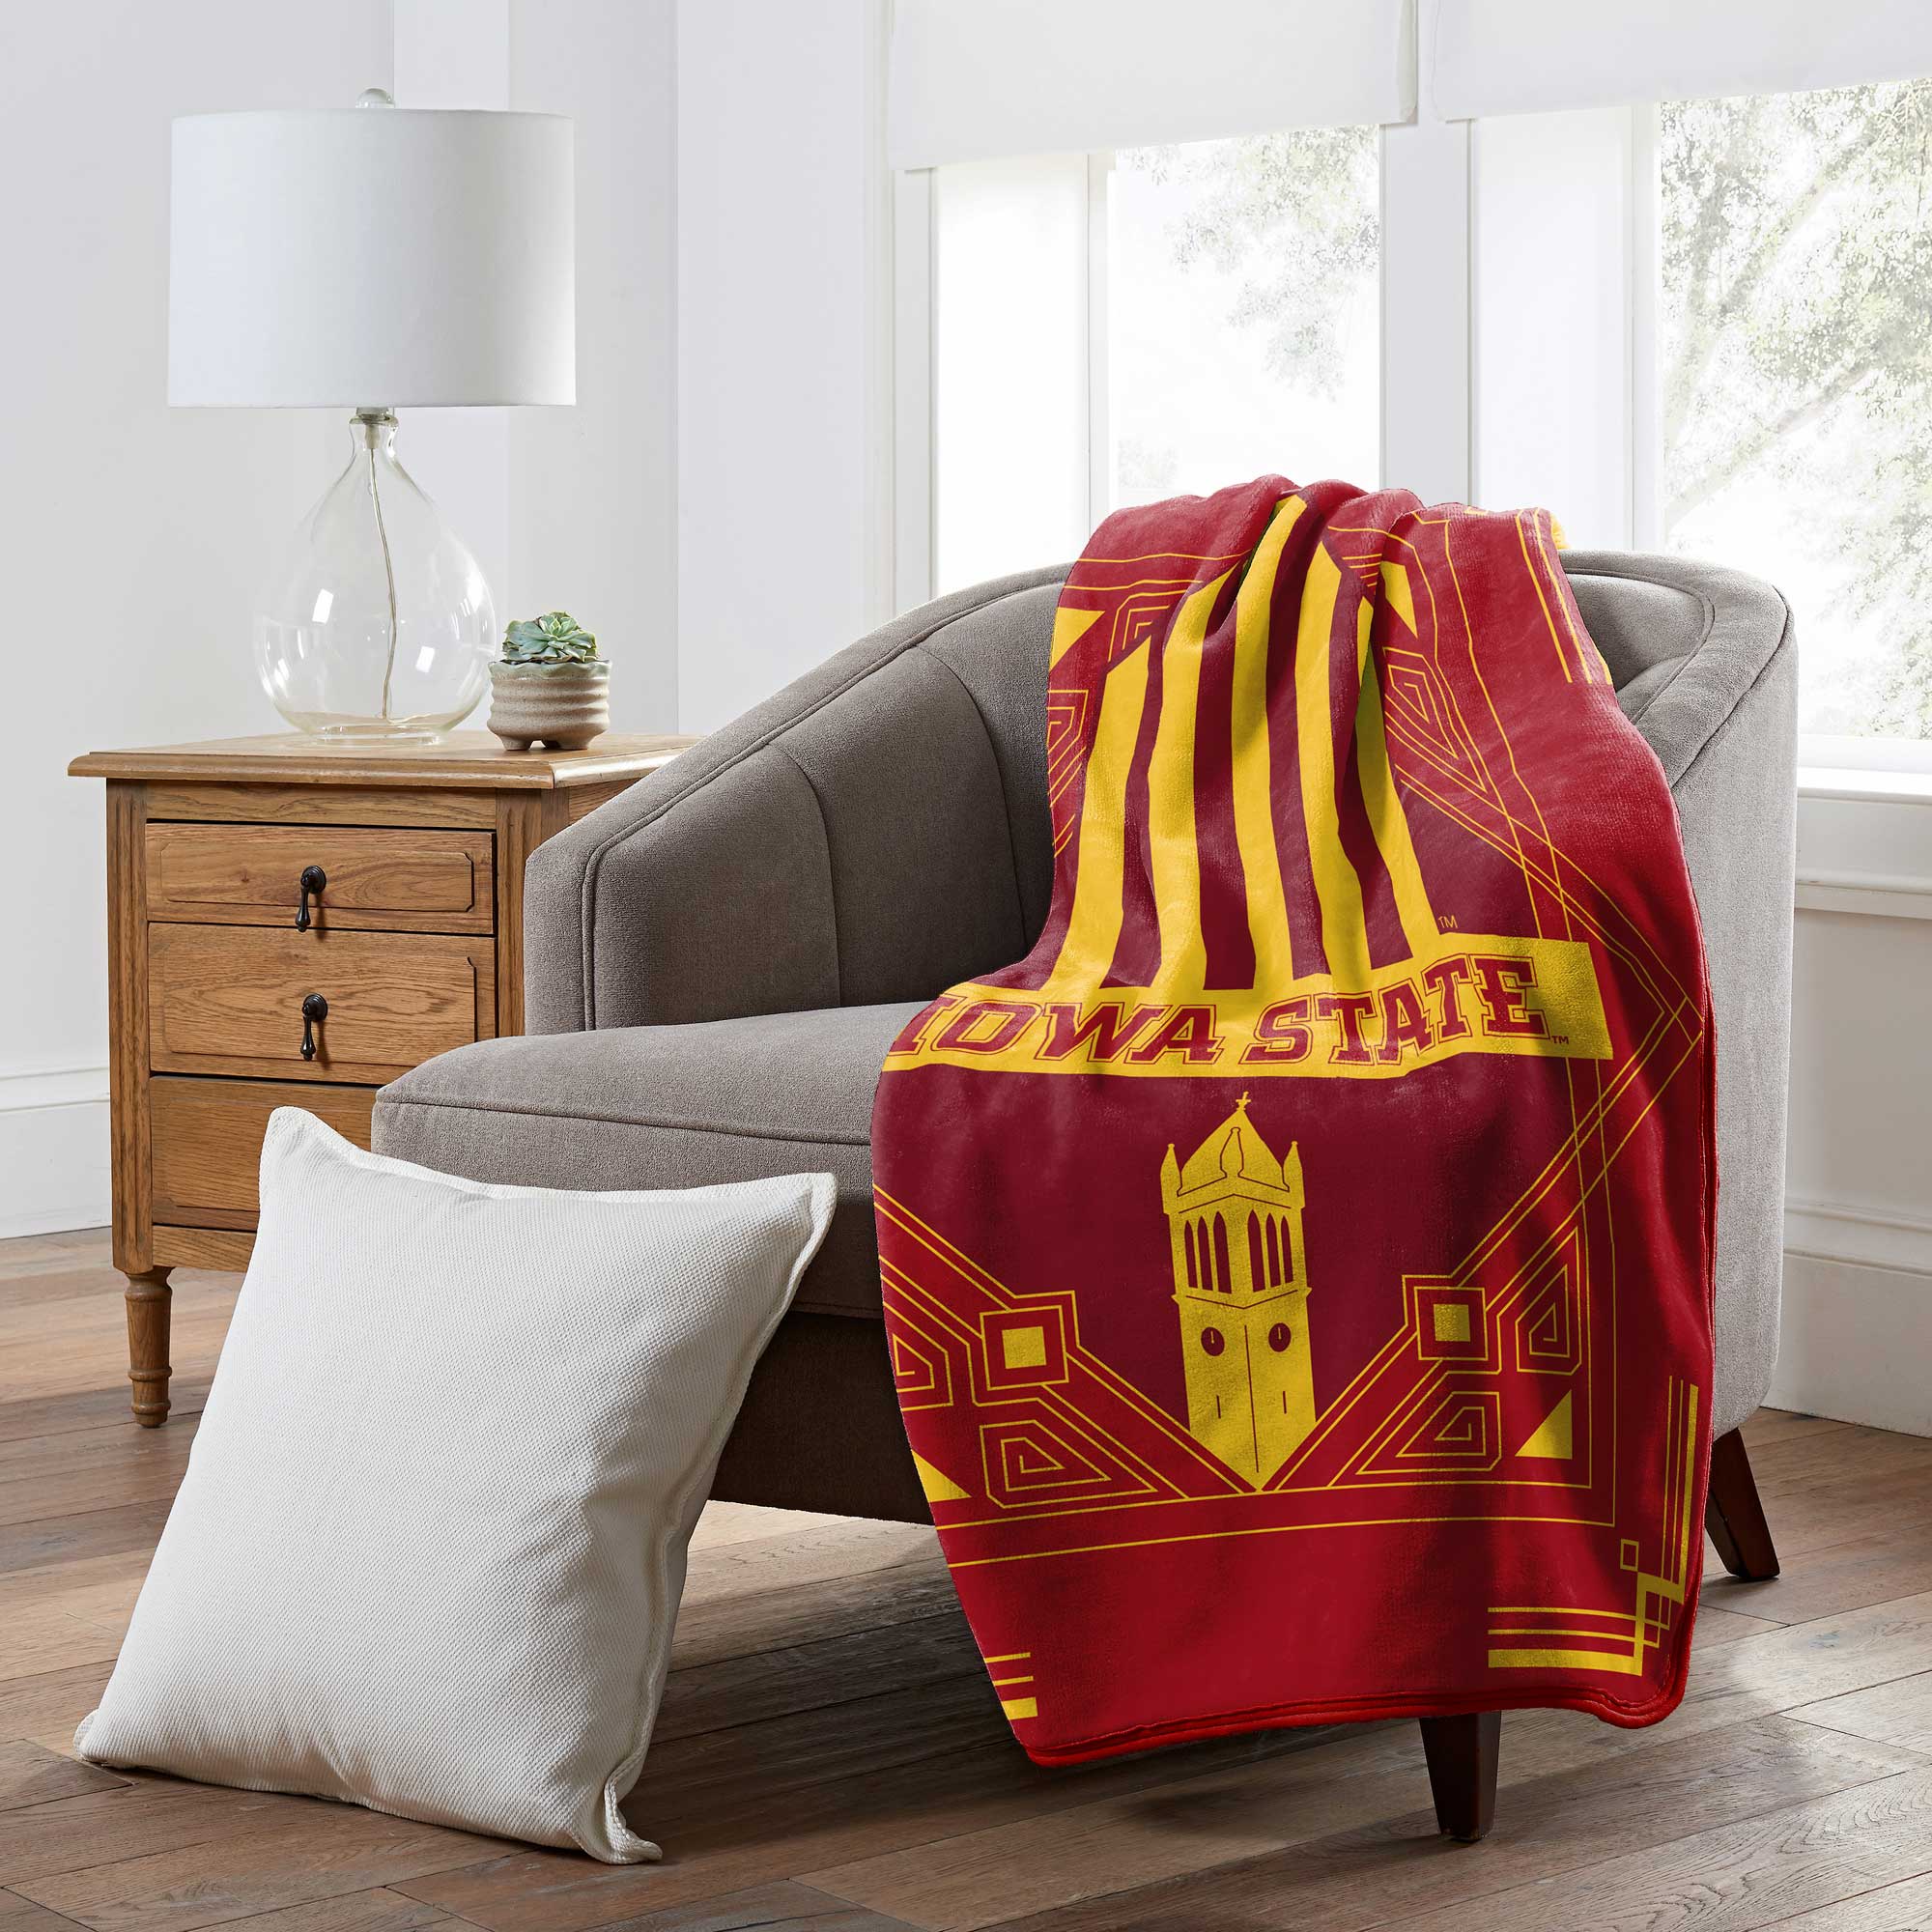 The Northwest Group Iowa State Cyclones 50" x 60" Deco Silk Touch Throw Blanket - image 2 of 2